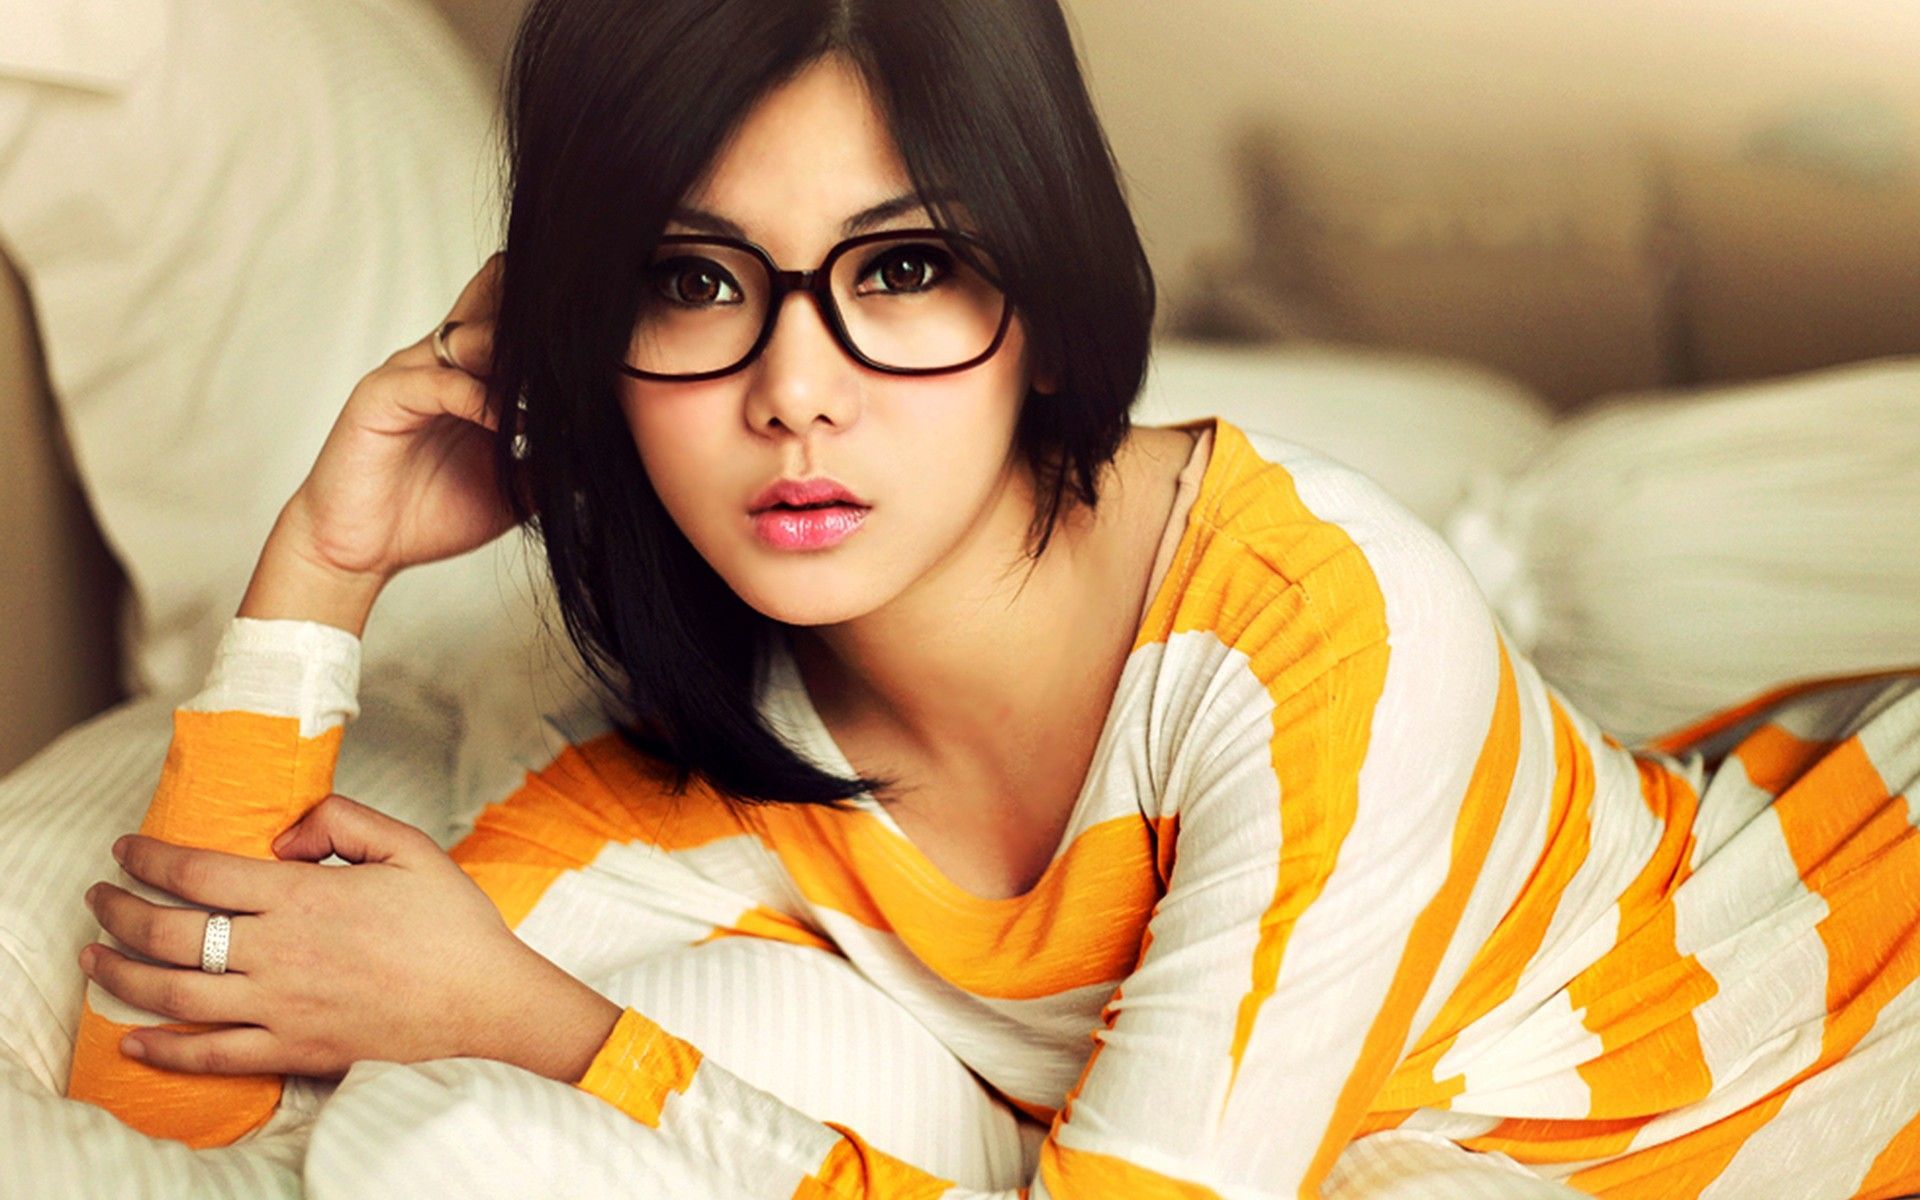 women models glasses Indonesia Asians girls with glasses upscaled badquality Valentine Fannie brenditaworks. Brunette glasses, Fashion photo, Girls with glasses